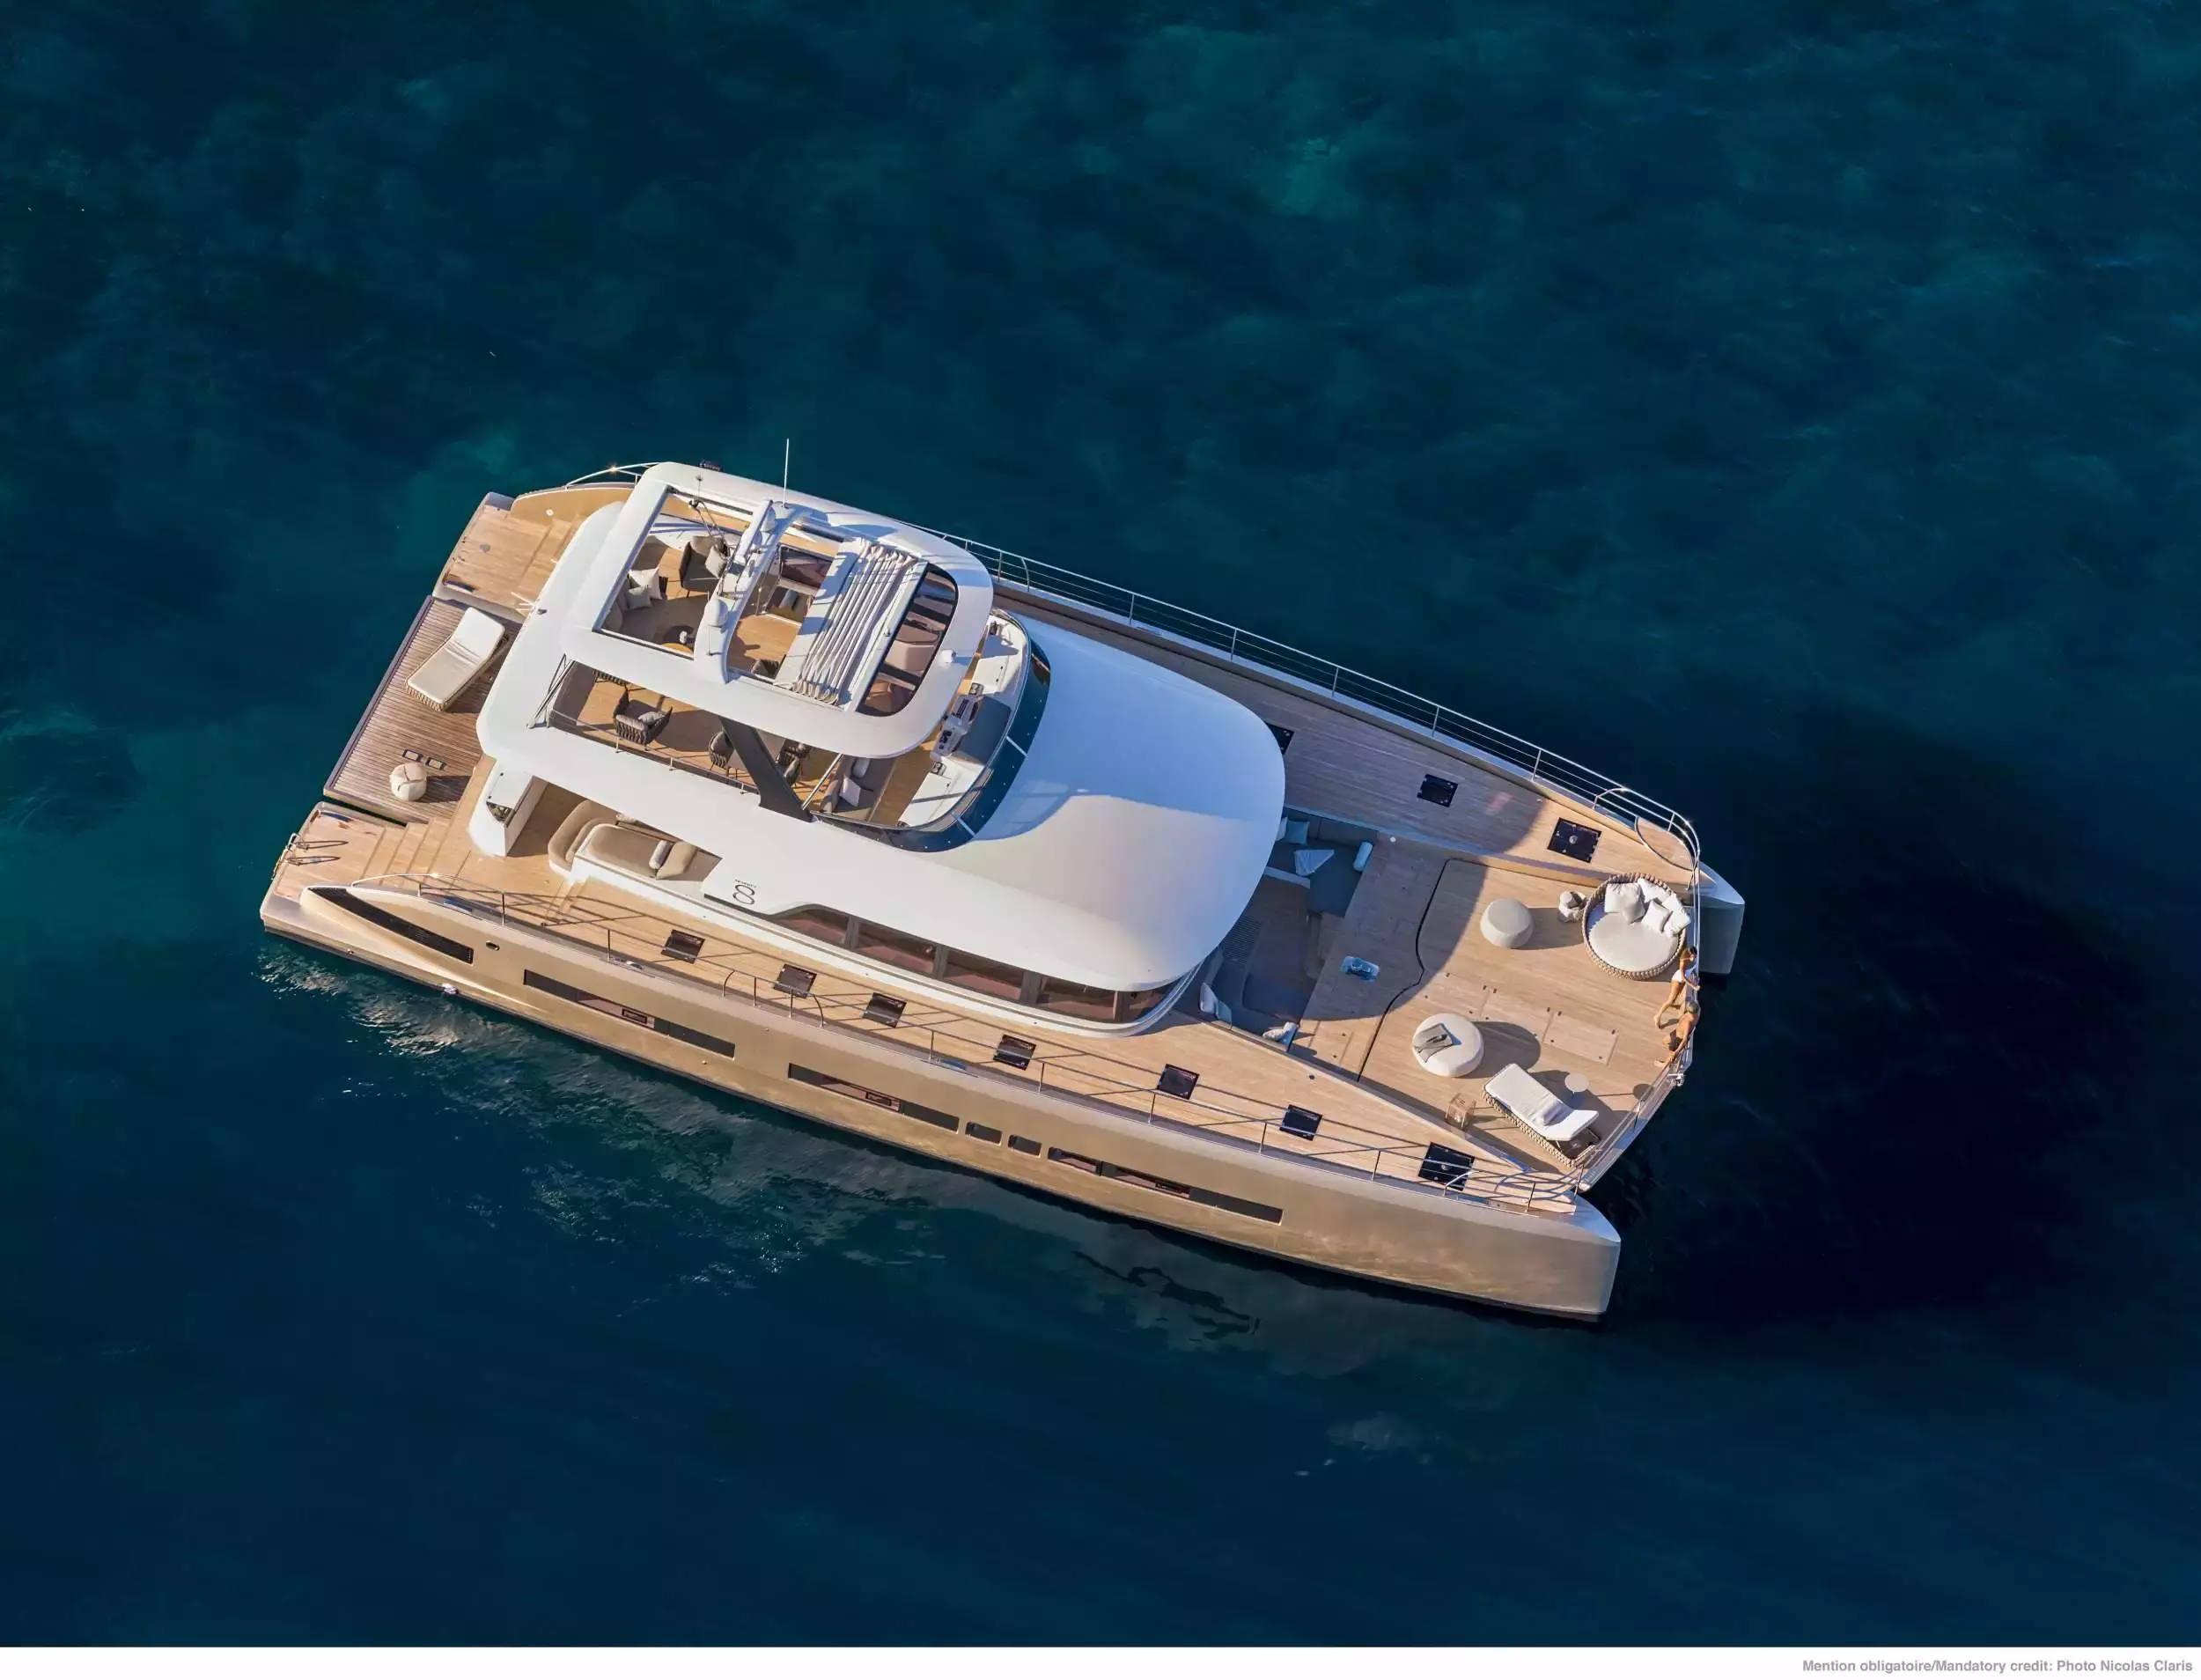 Siete Mares by Lagoon - Top rates for a Charter of a private Luxury Catamaran in Anguilla